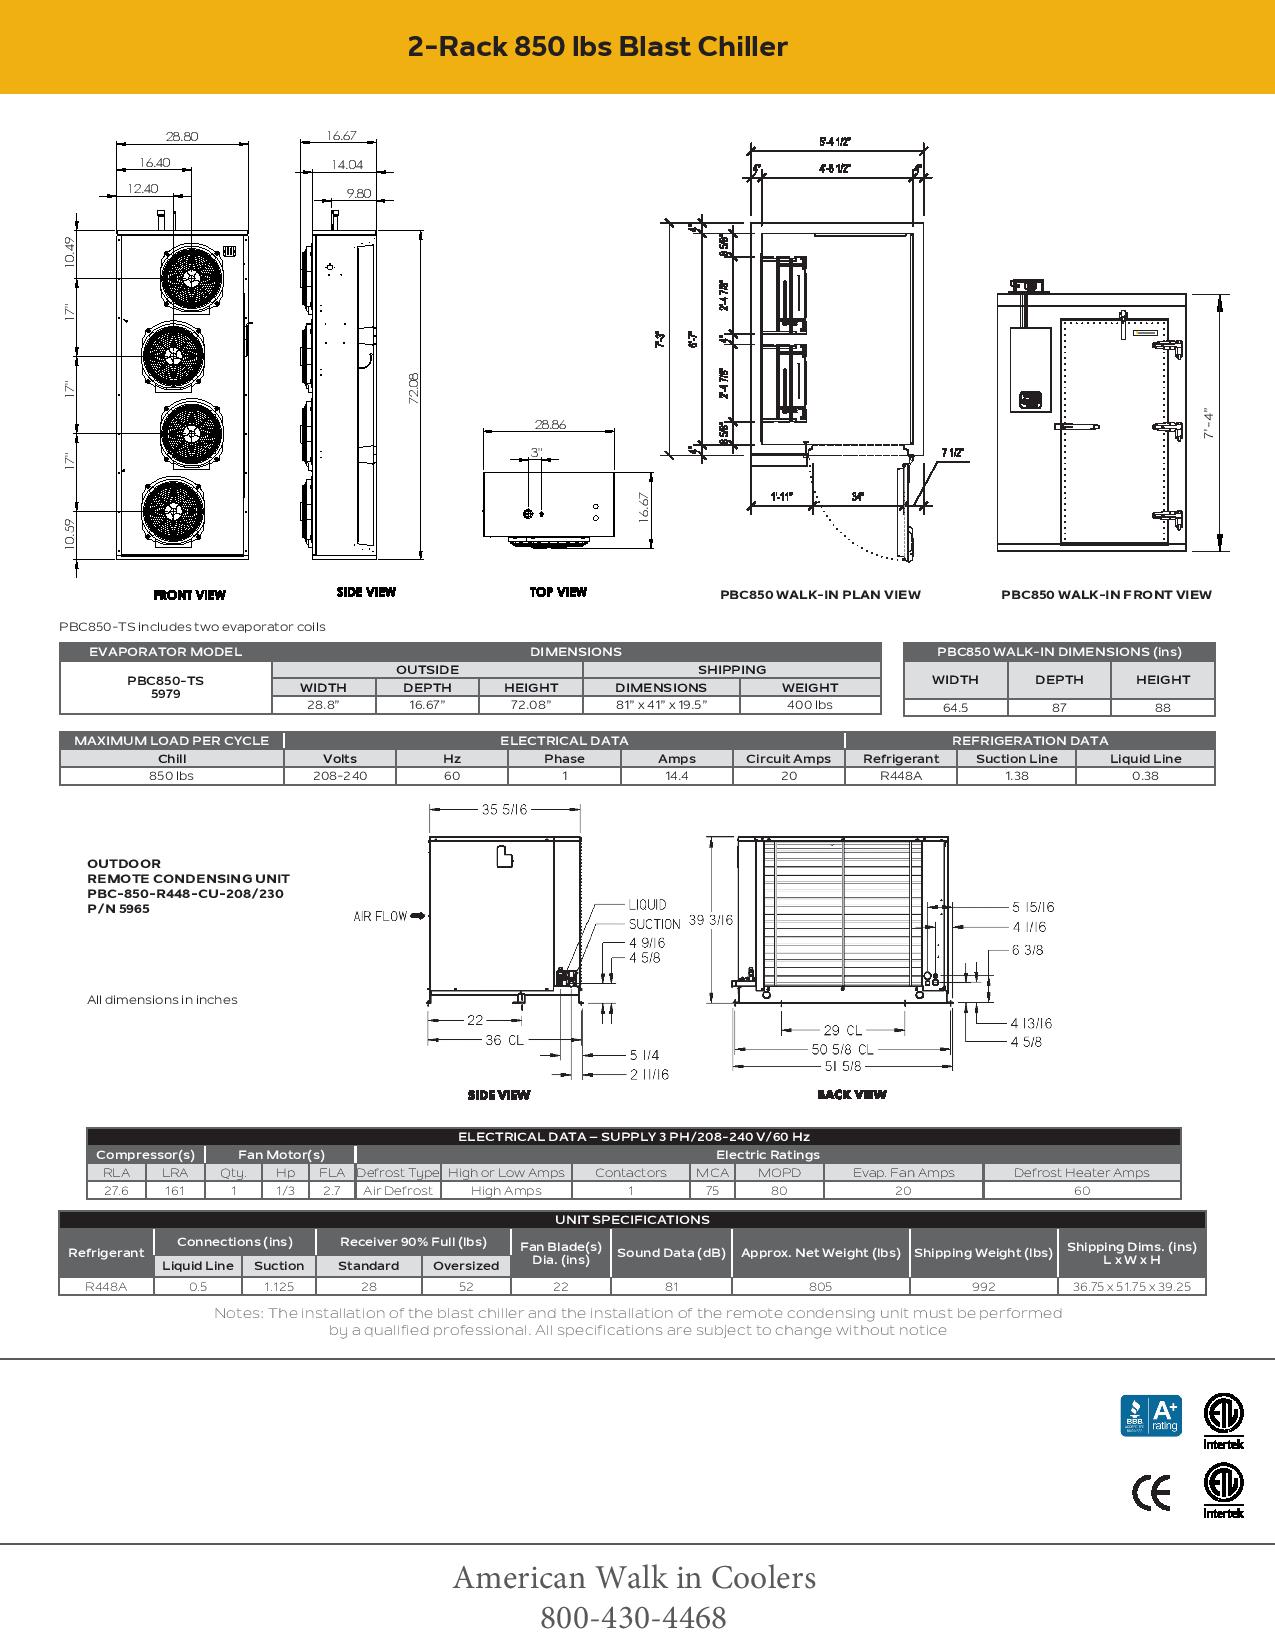 AWIC-850-lbs-Blast-Chiller-page-002